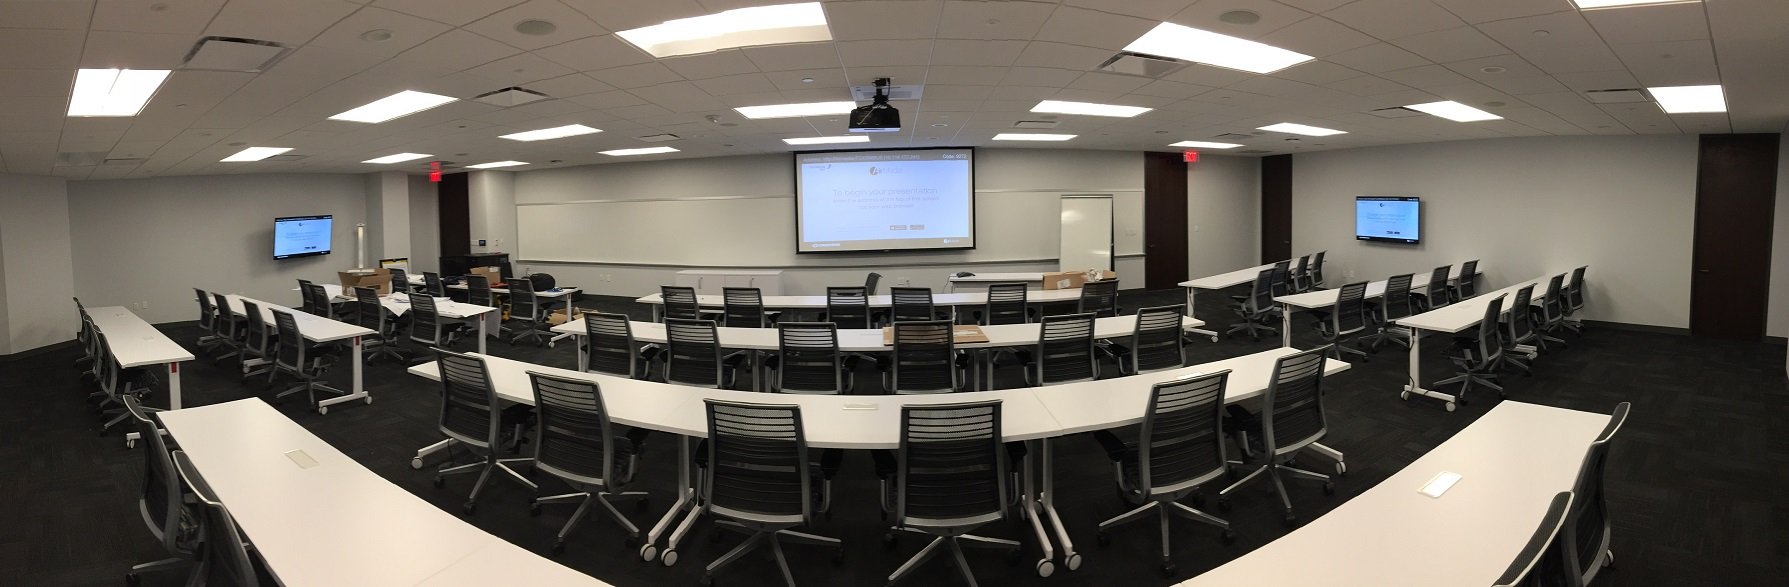 Projection display in a classroom-training room